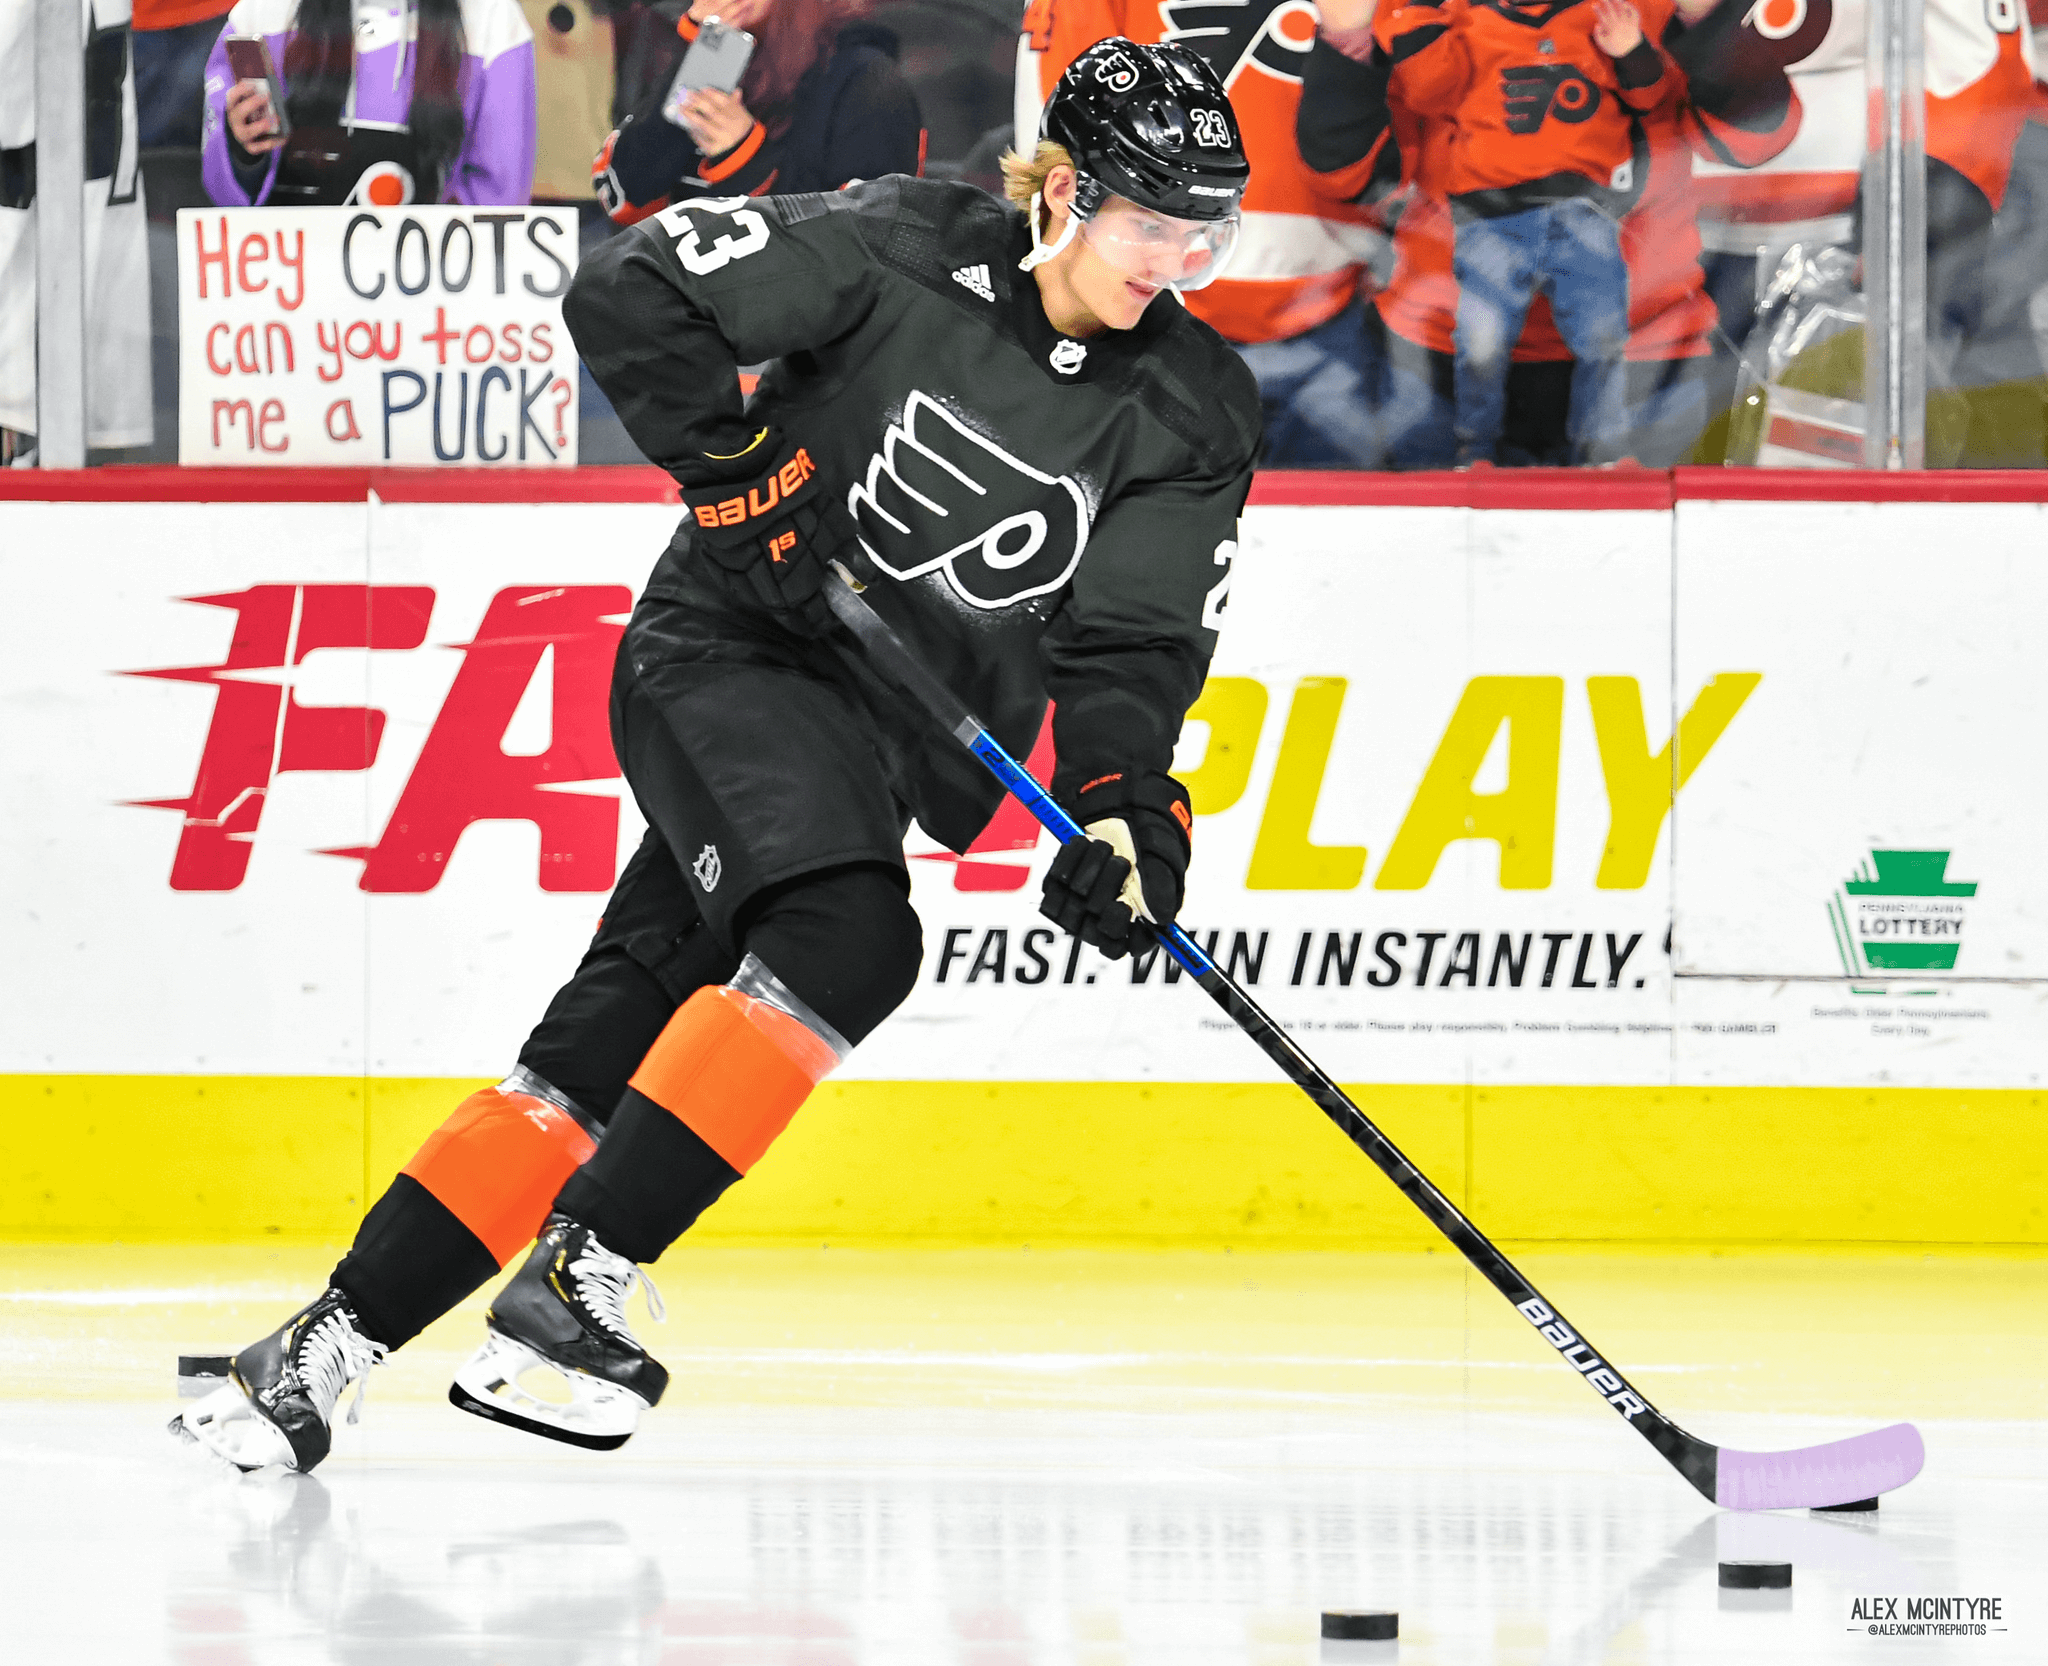 GOTTA SEE IT: Oskar Lindblom Skates In Warmups With Flyers Before Game 4 